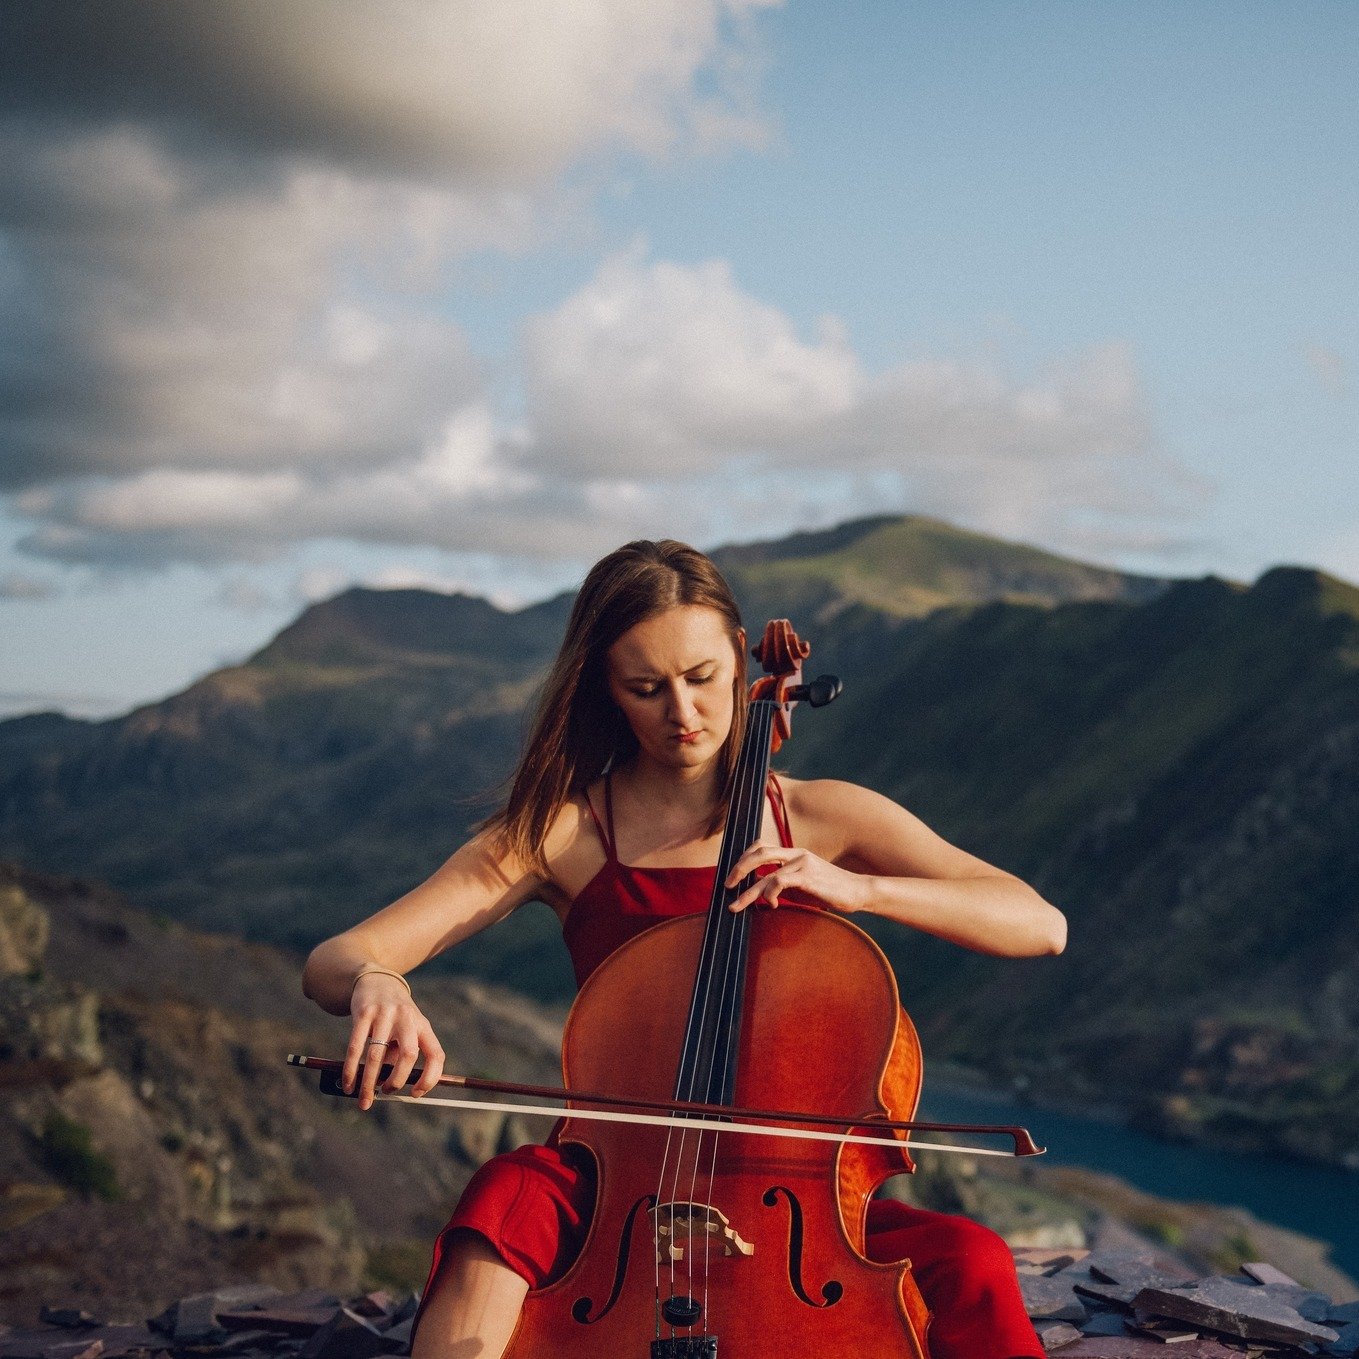 Introducing: Elin 🎻

Elin is a Cellist who offers a variety of music, working closely with you to provide specialised repertoire that is catered to your event. In addition to her extensive music list, Elin takes request songs and can arrange the mus